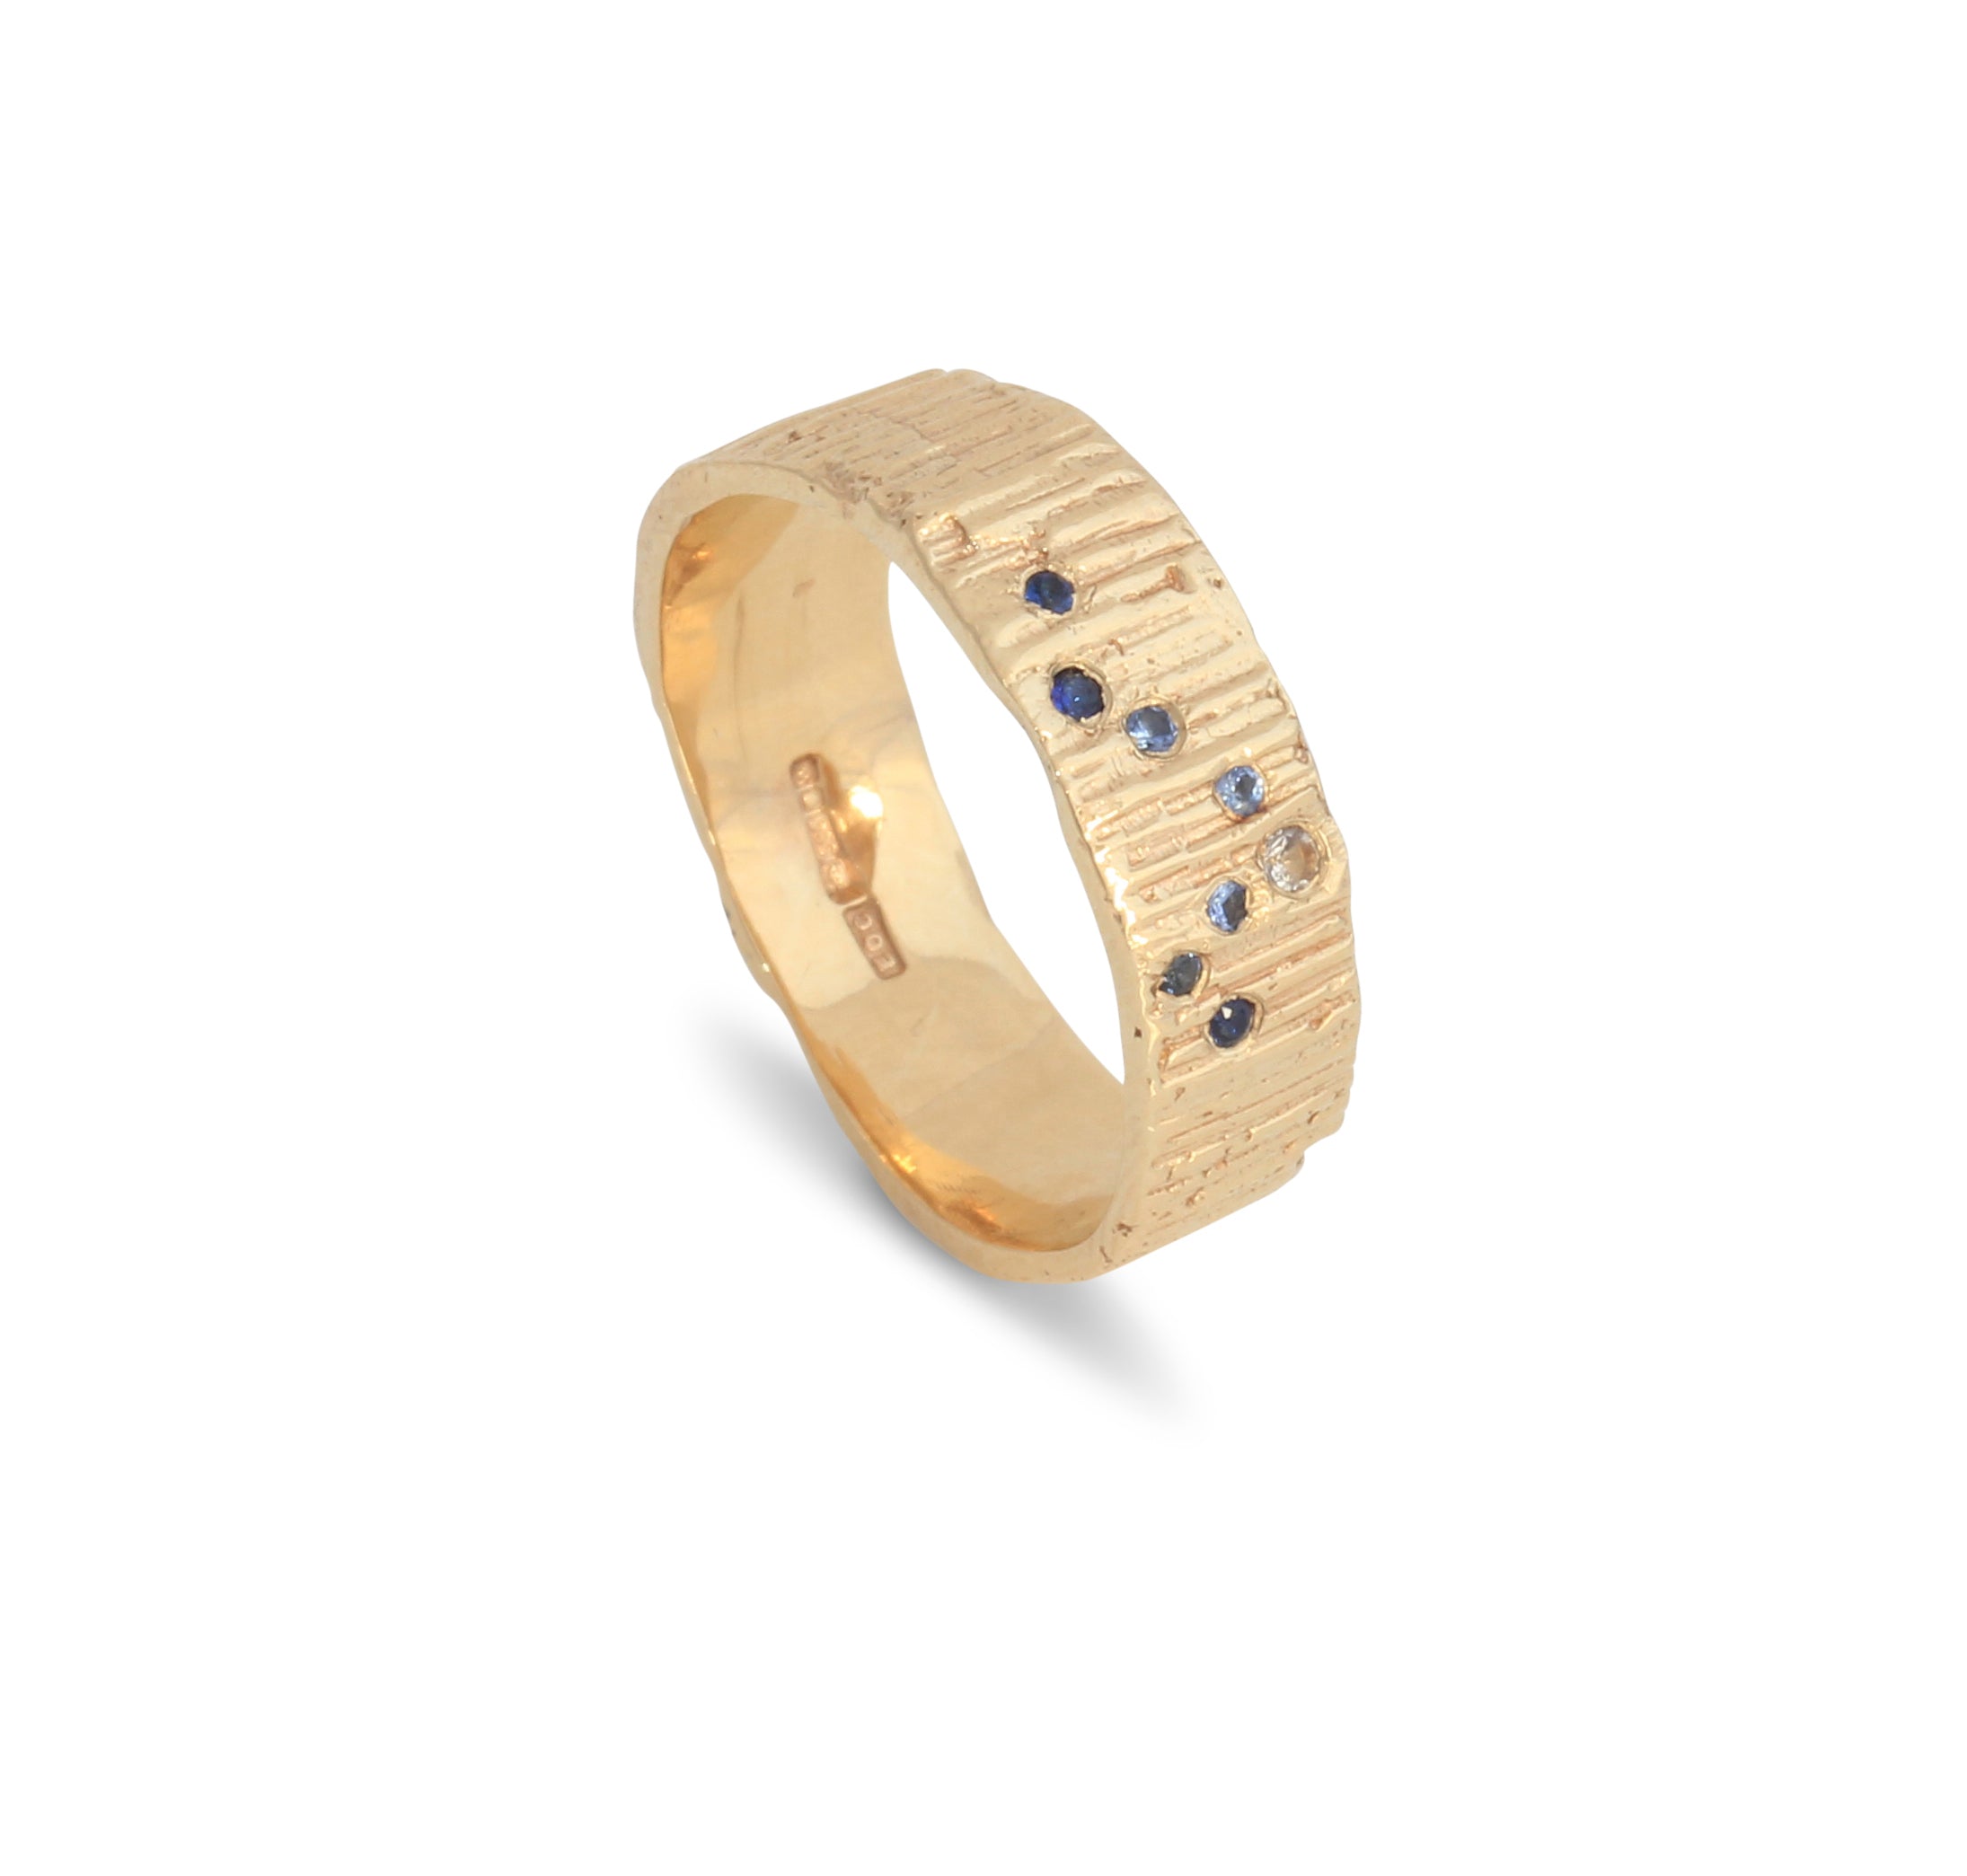 Ring with sapphires in the shape of a wave. Perfect surfer girl ring